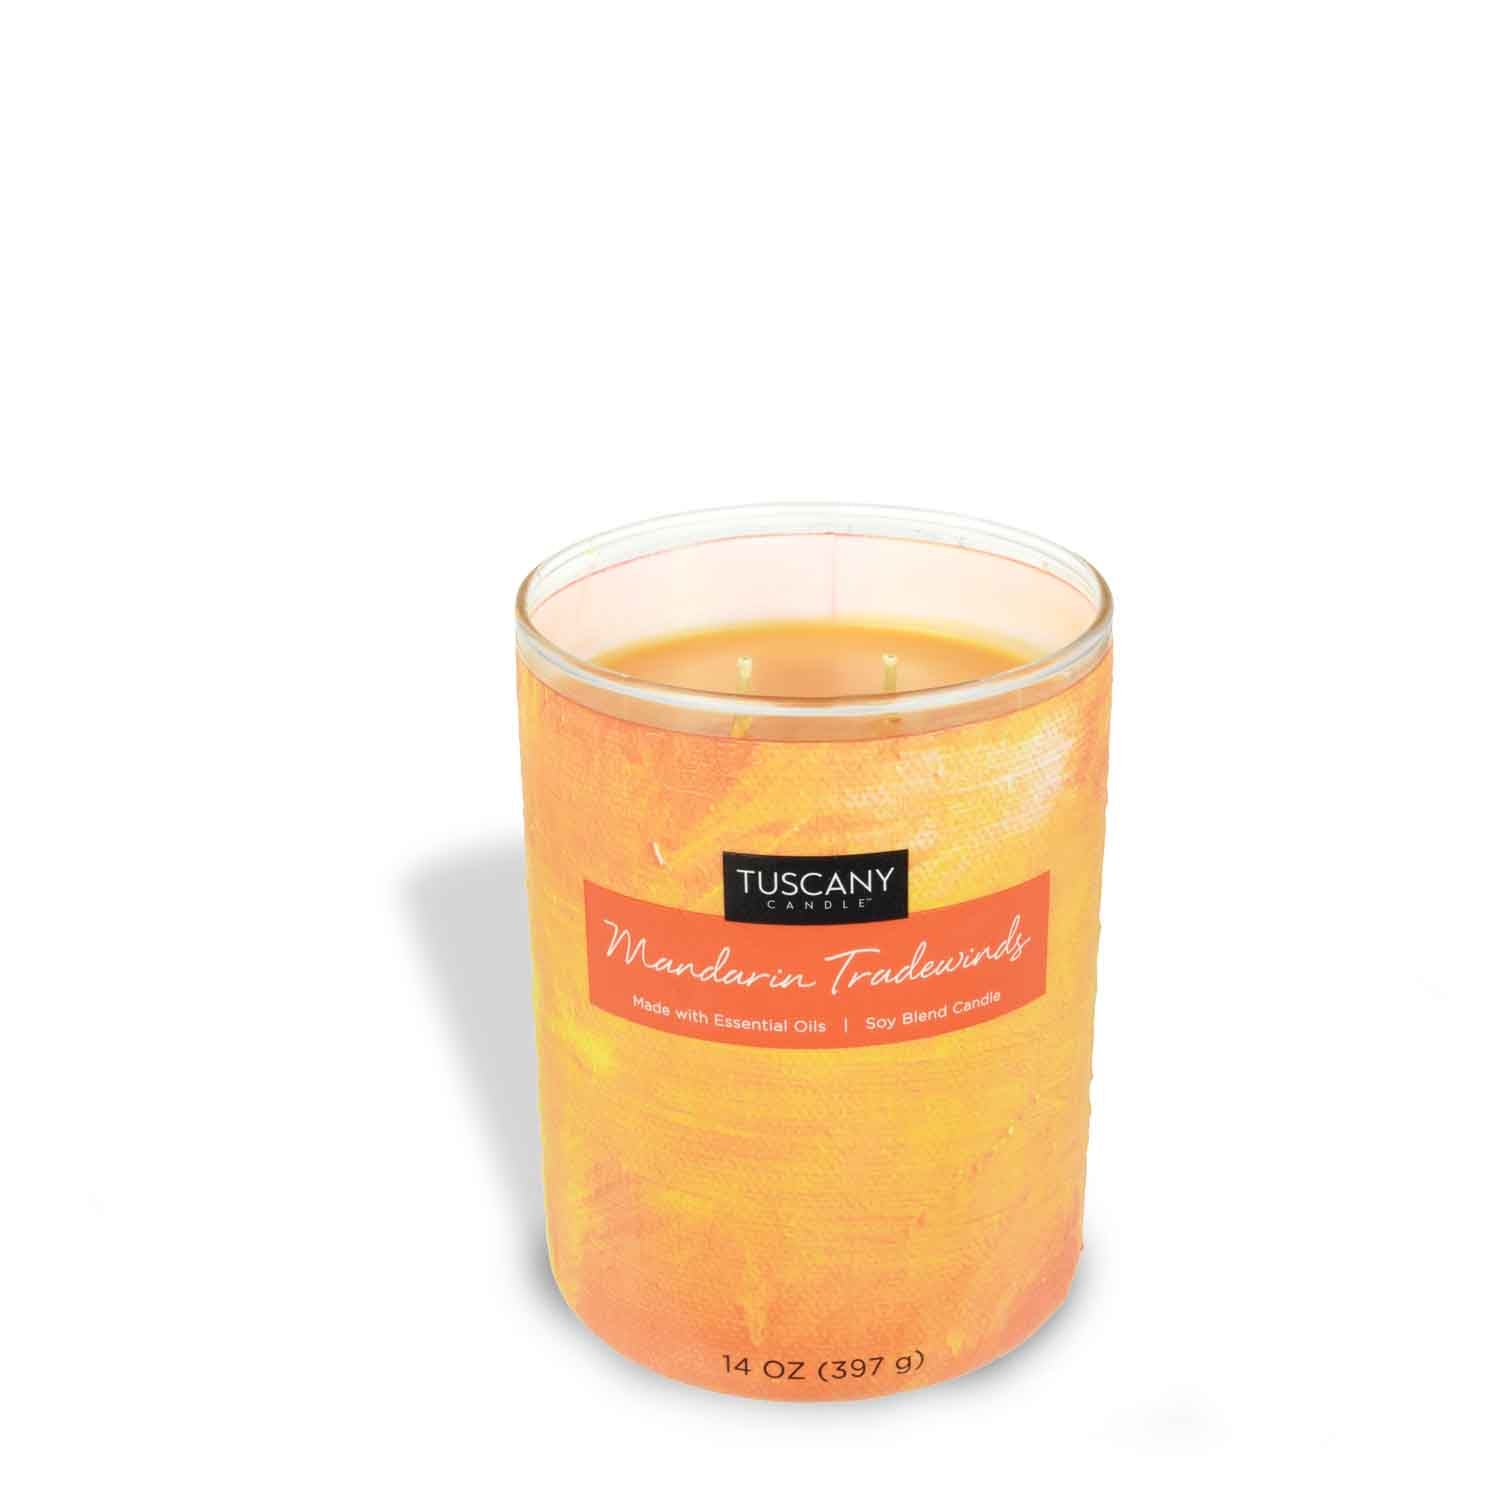 An Mandarin Tradewinds scented jar candle (14 oz) from the Tuscany Candle brand, in a glass on a white background, perfect for enhancing home décor.